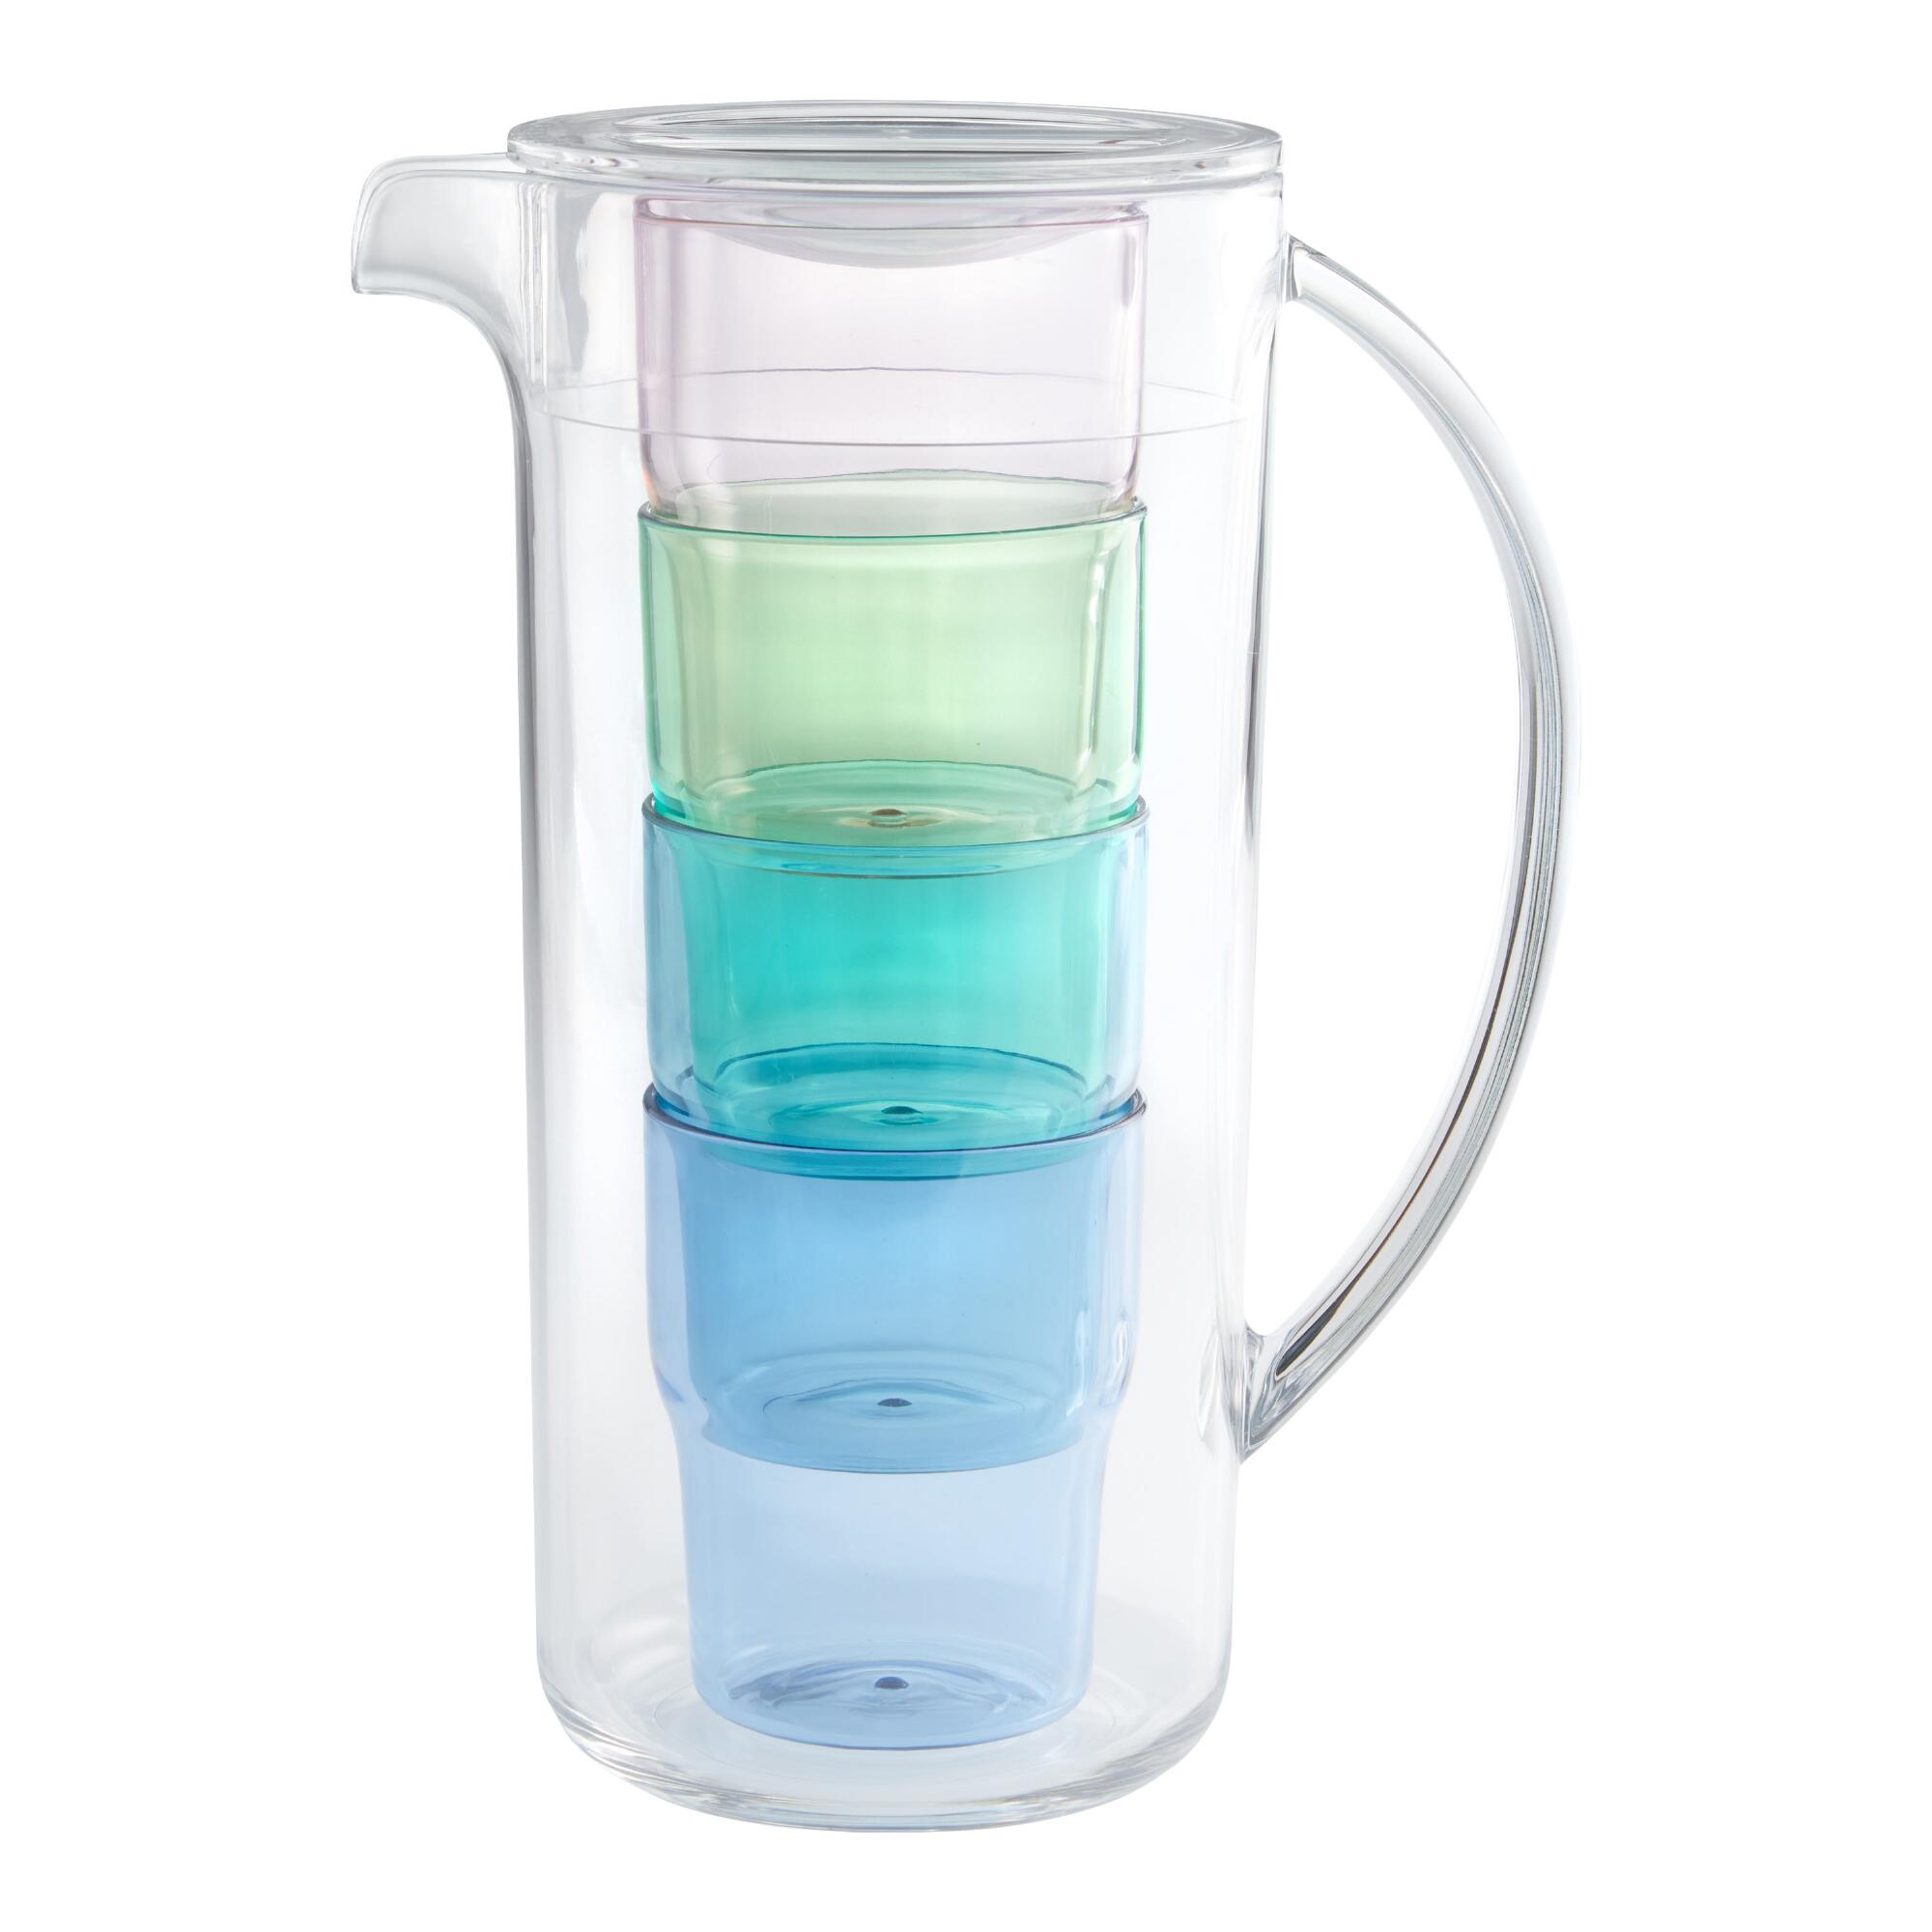 Clear Acrylic Pitcher Plastic Water Pitcher Acrylic Water Pot